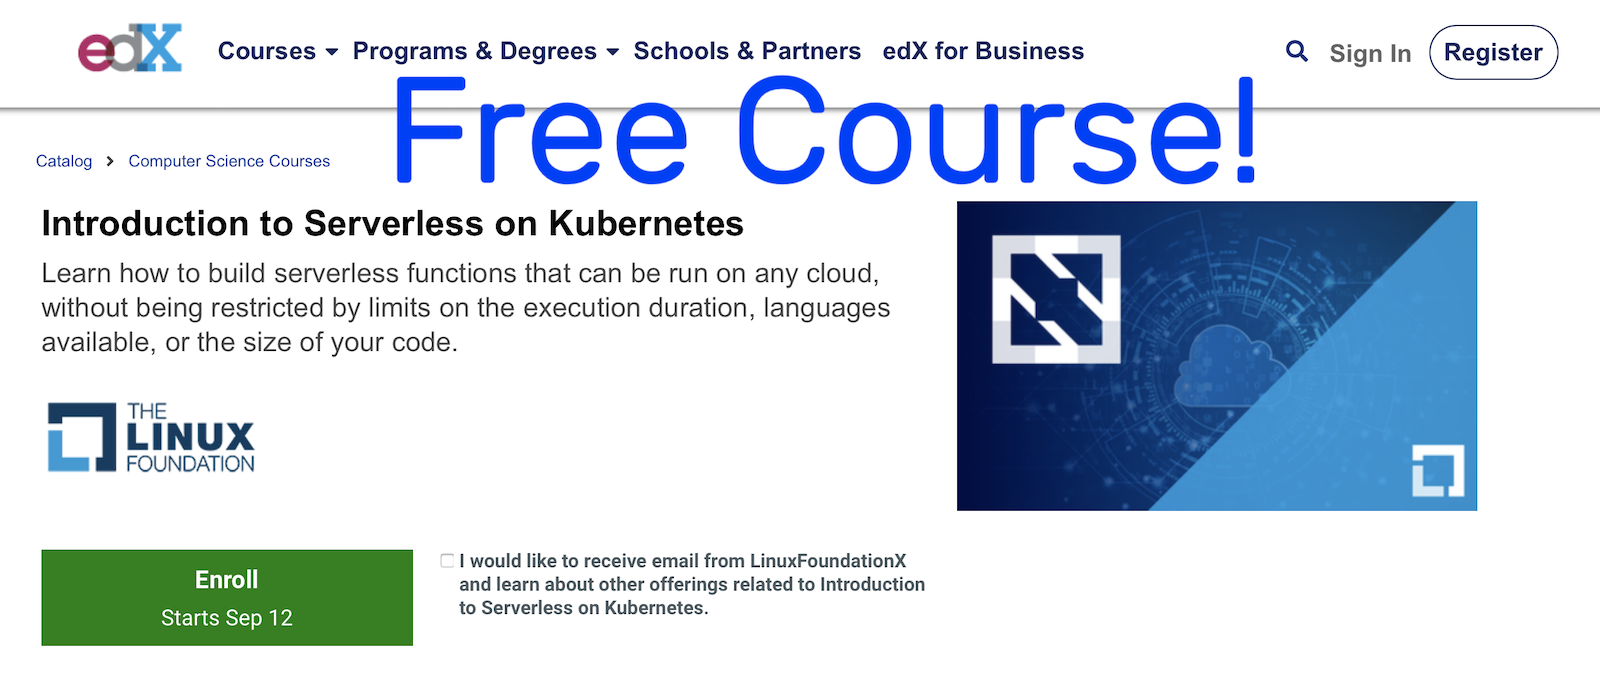 Free course!